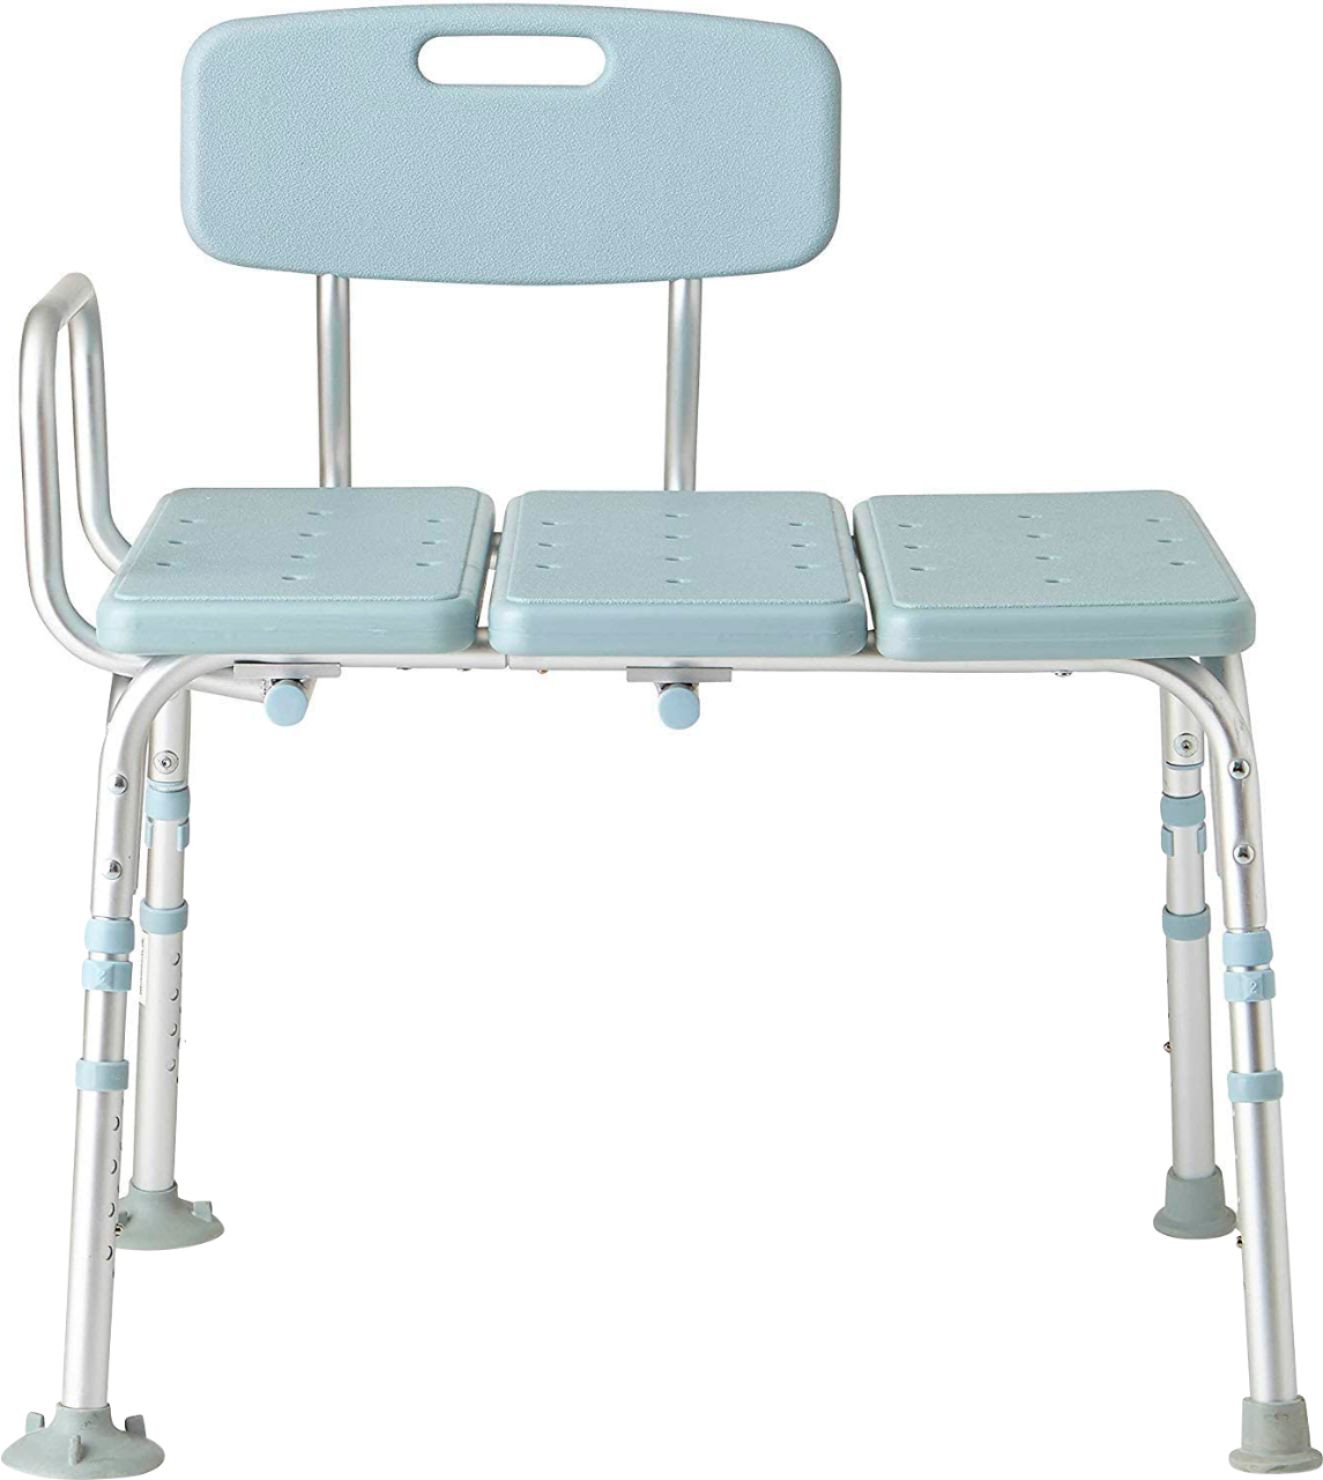 Angle View: Medline Tub Transfer Bench With Microban Antimicrobial Protection, for Use as A Shower Bench or Bath Seat, Light Blue - Blue